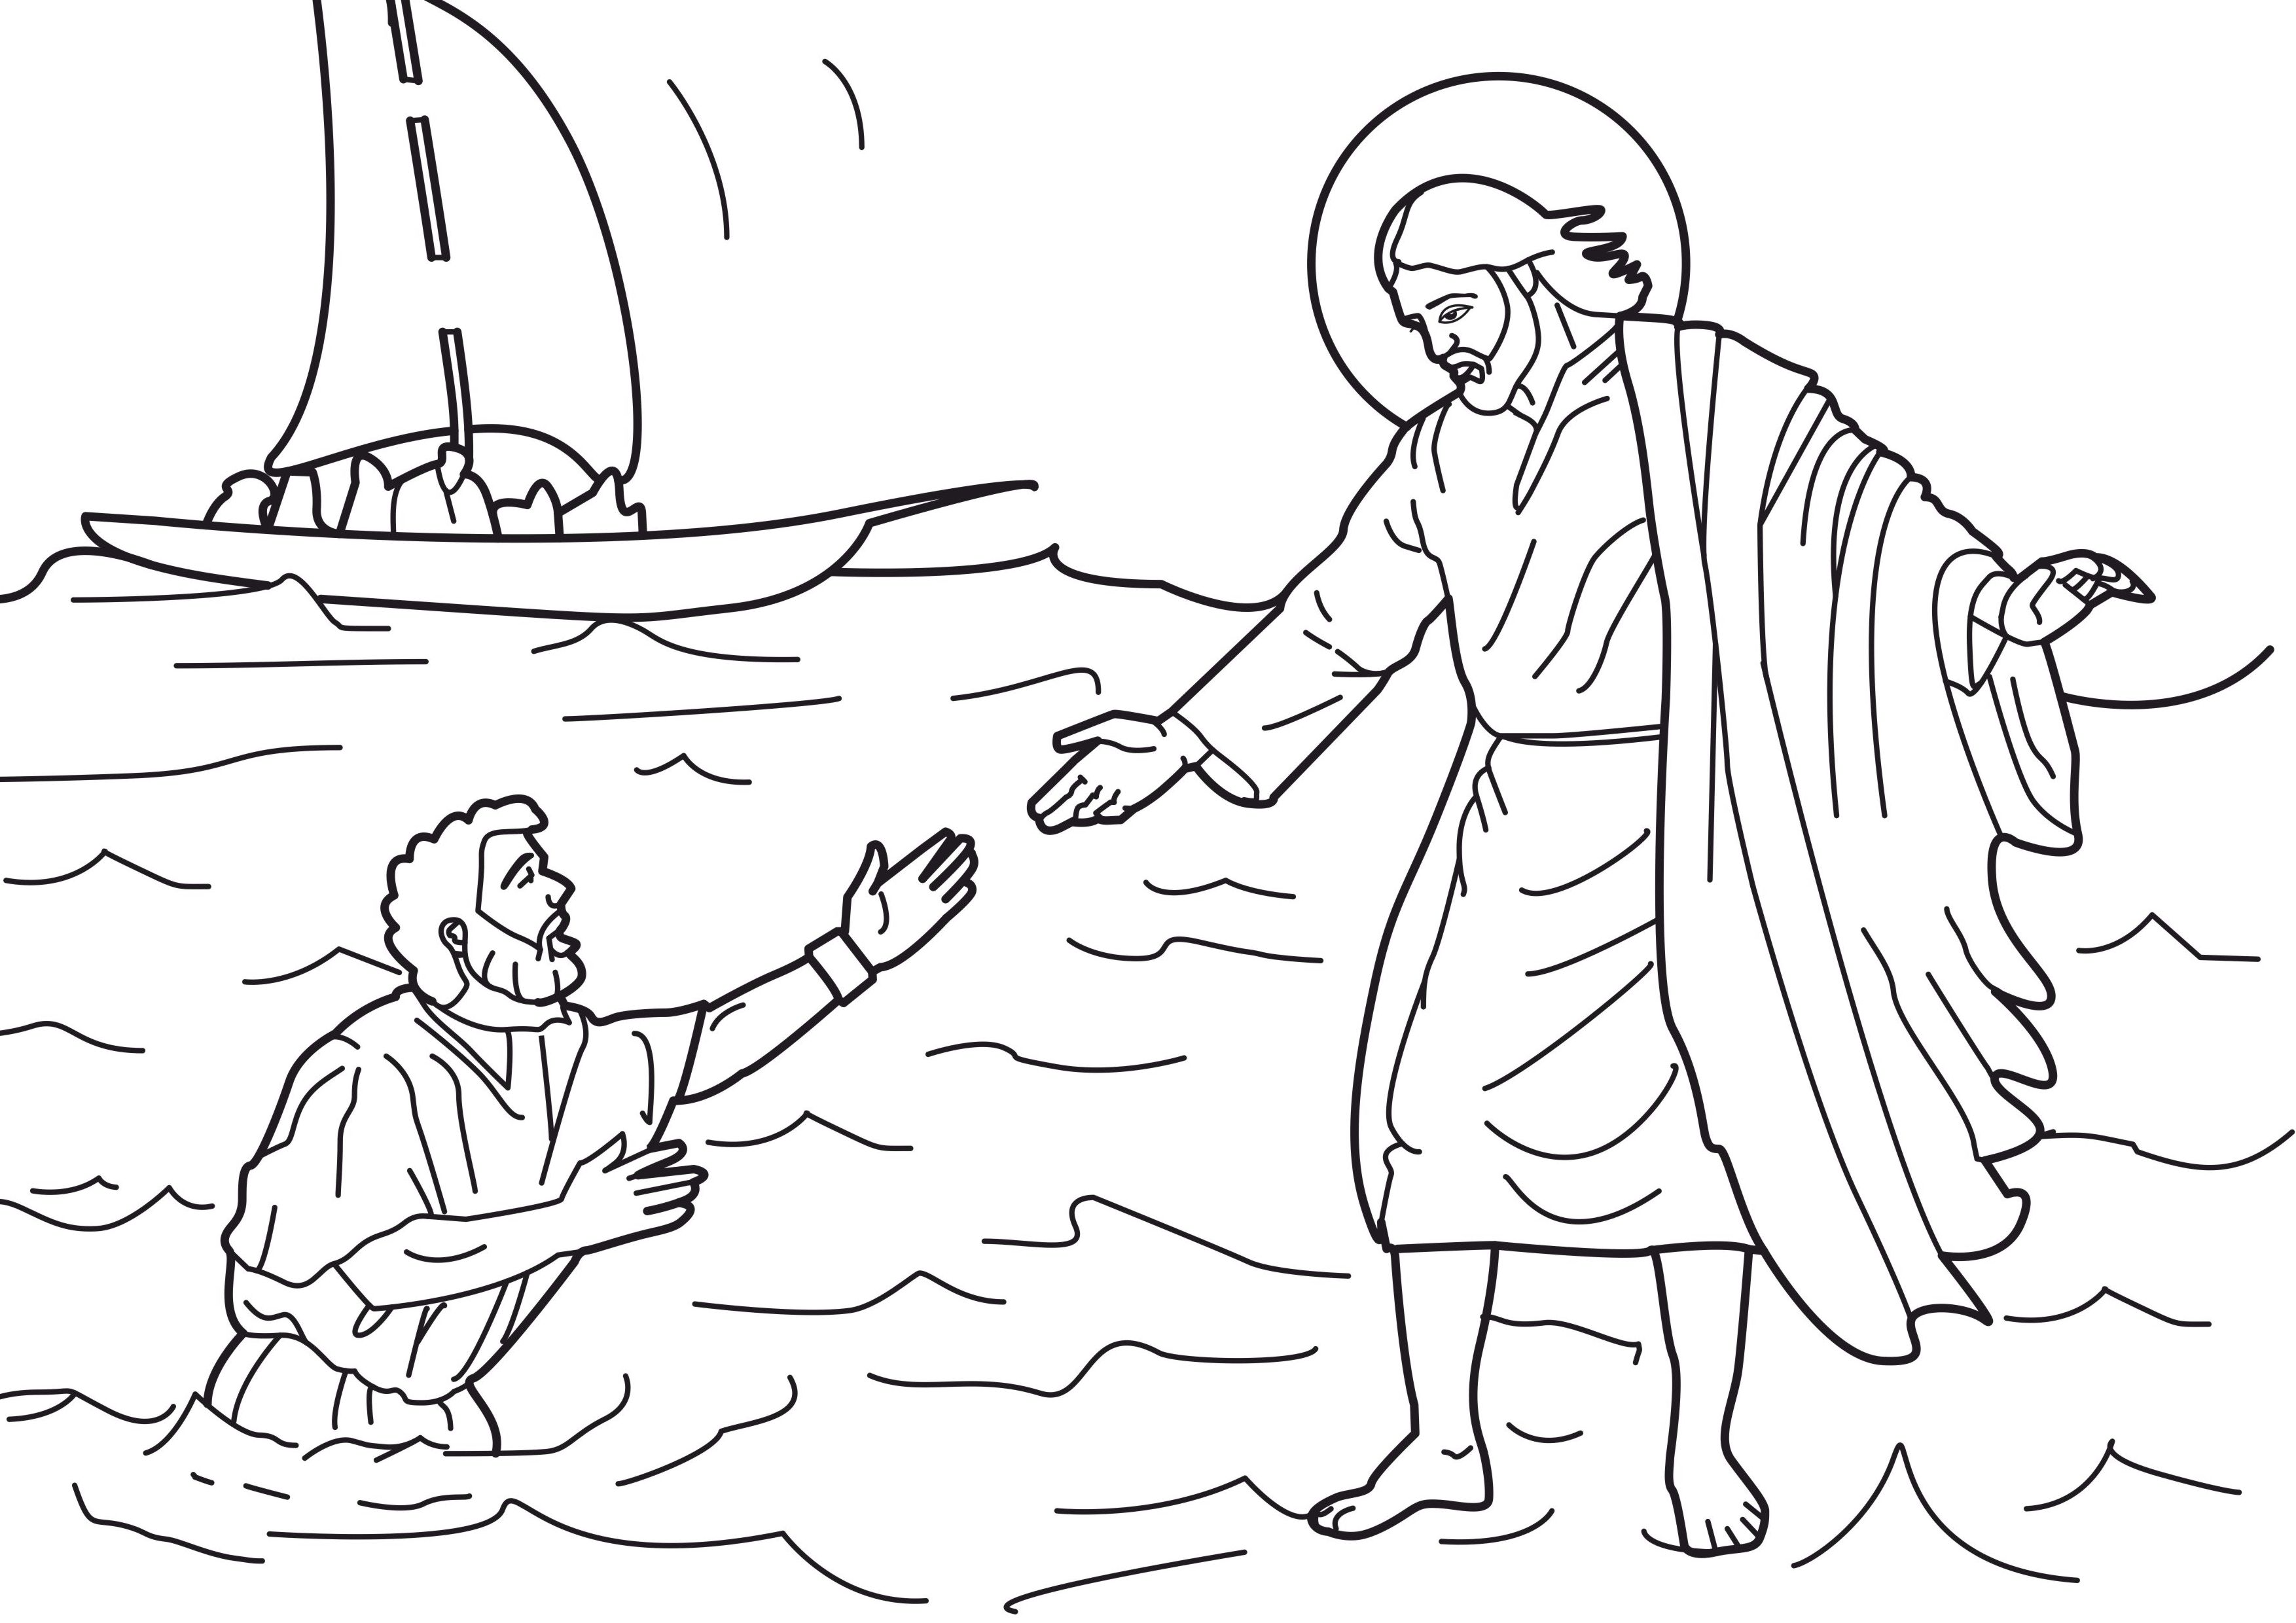 clipart jesus and peter walking on water - photo #21